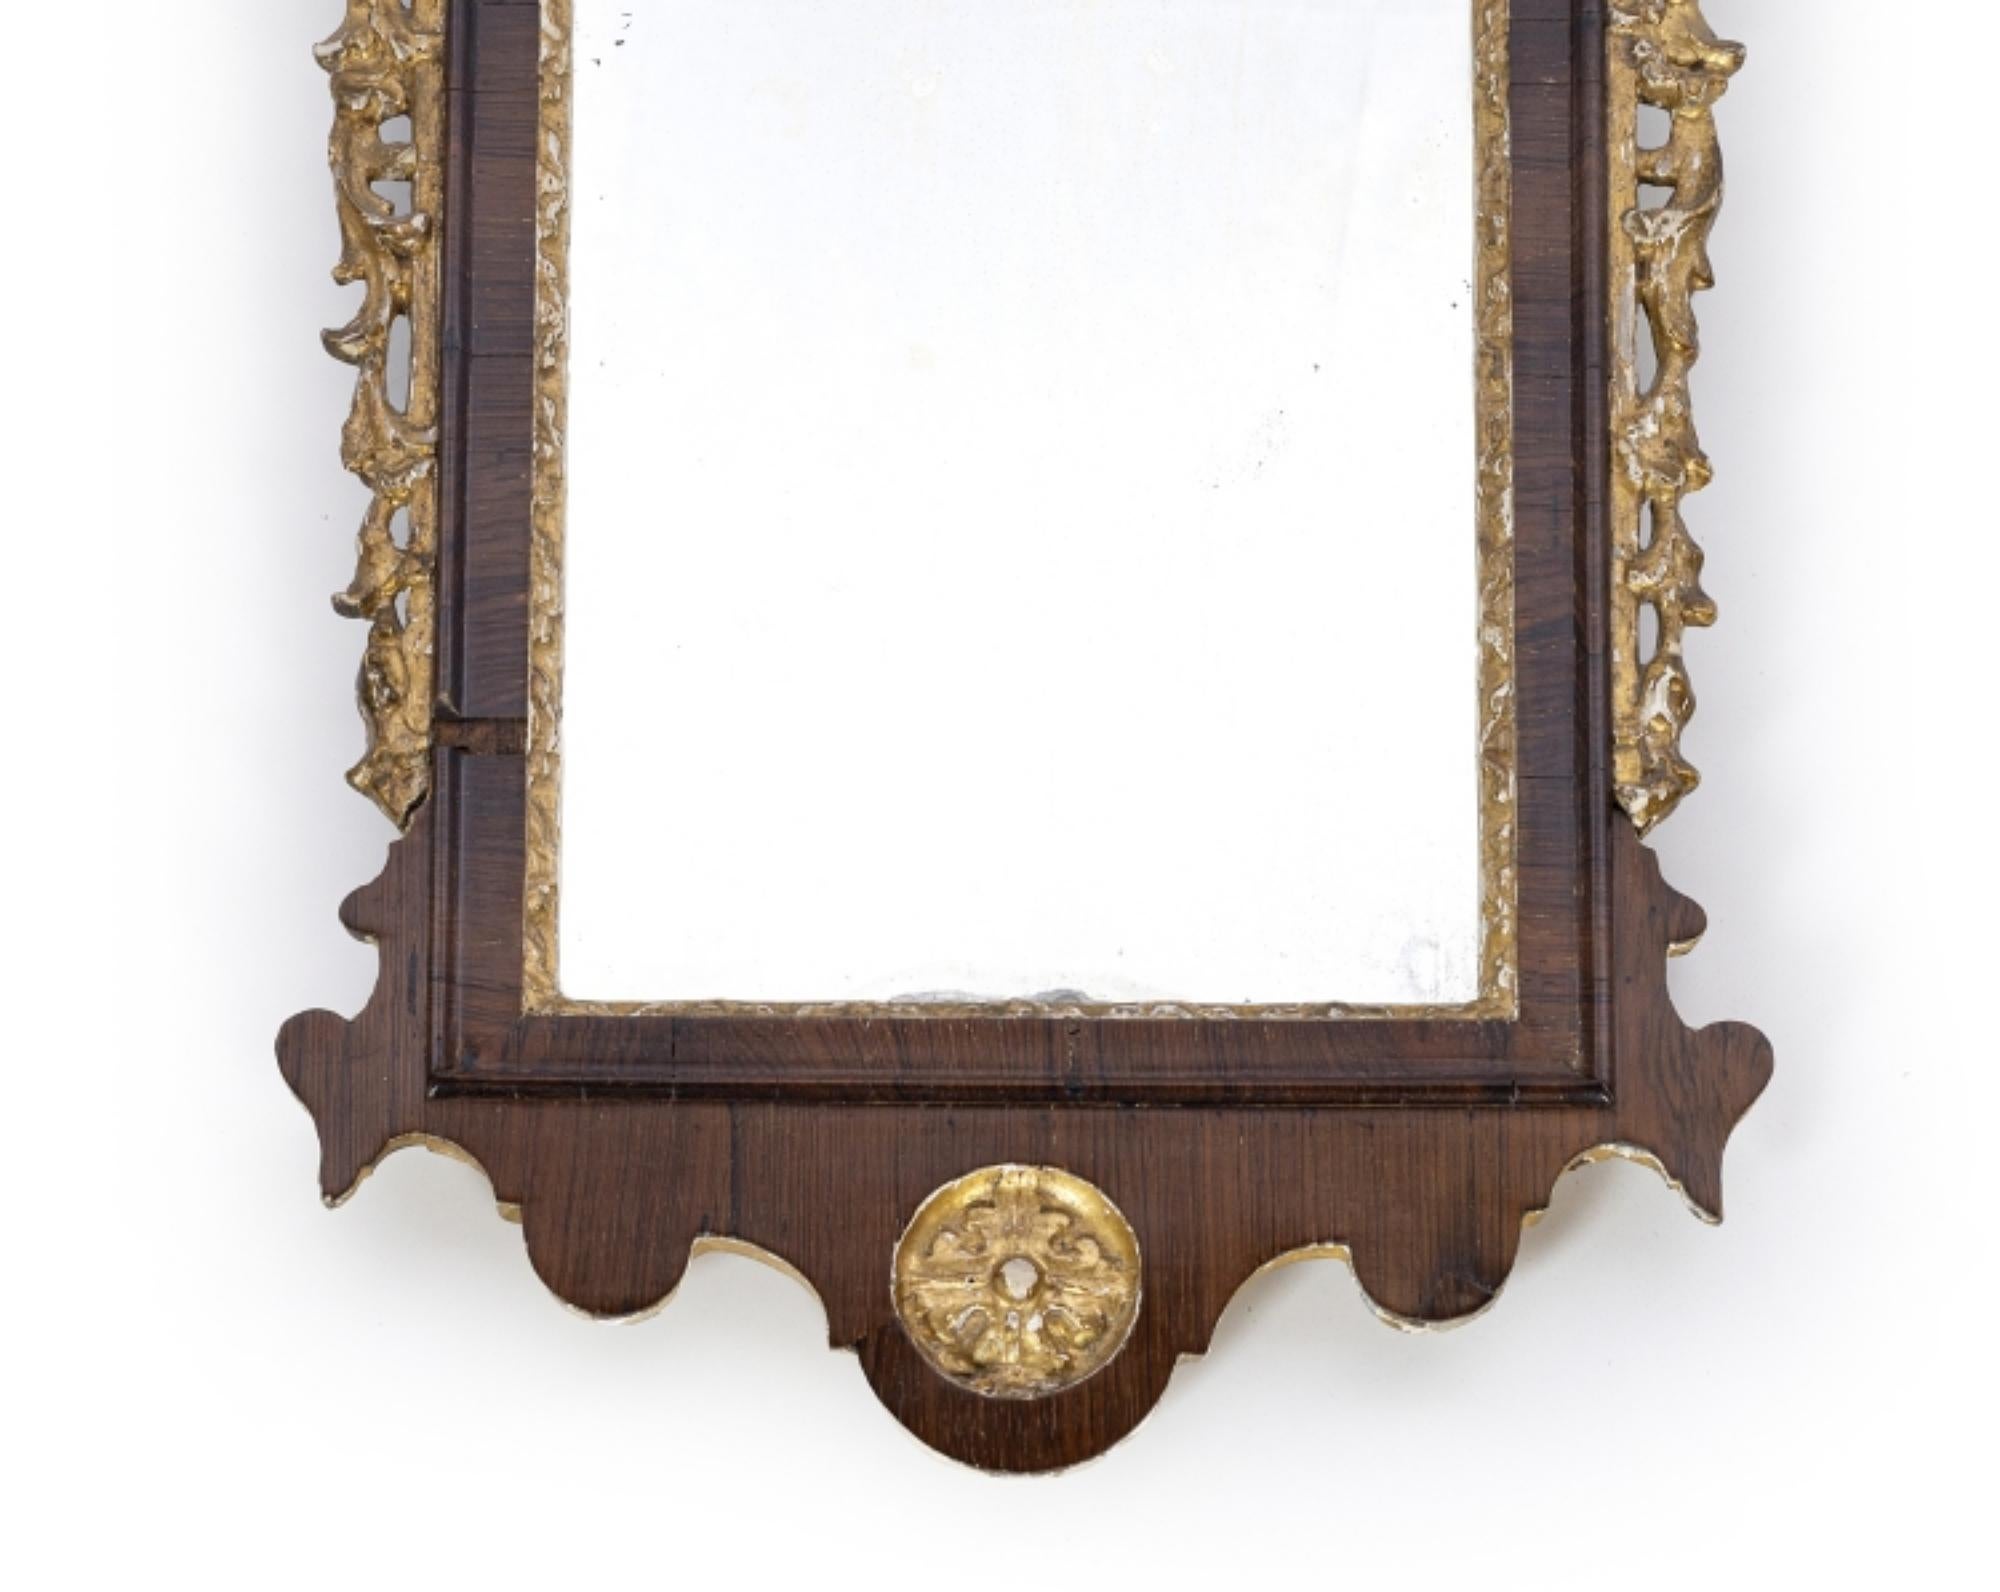 PORTUGUESE ROSEWOOD WALL MIRROR 18th century

Portuguese from the 18th century, 
rosewood veneer, carved and gilded wood, architectural cornice, winding and flower decoration. Defects for the age.
DIM.: 80 x 43 cm.